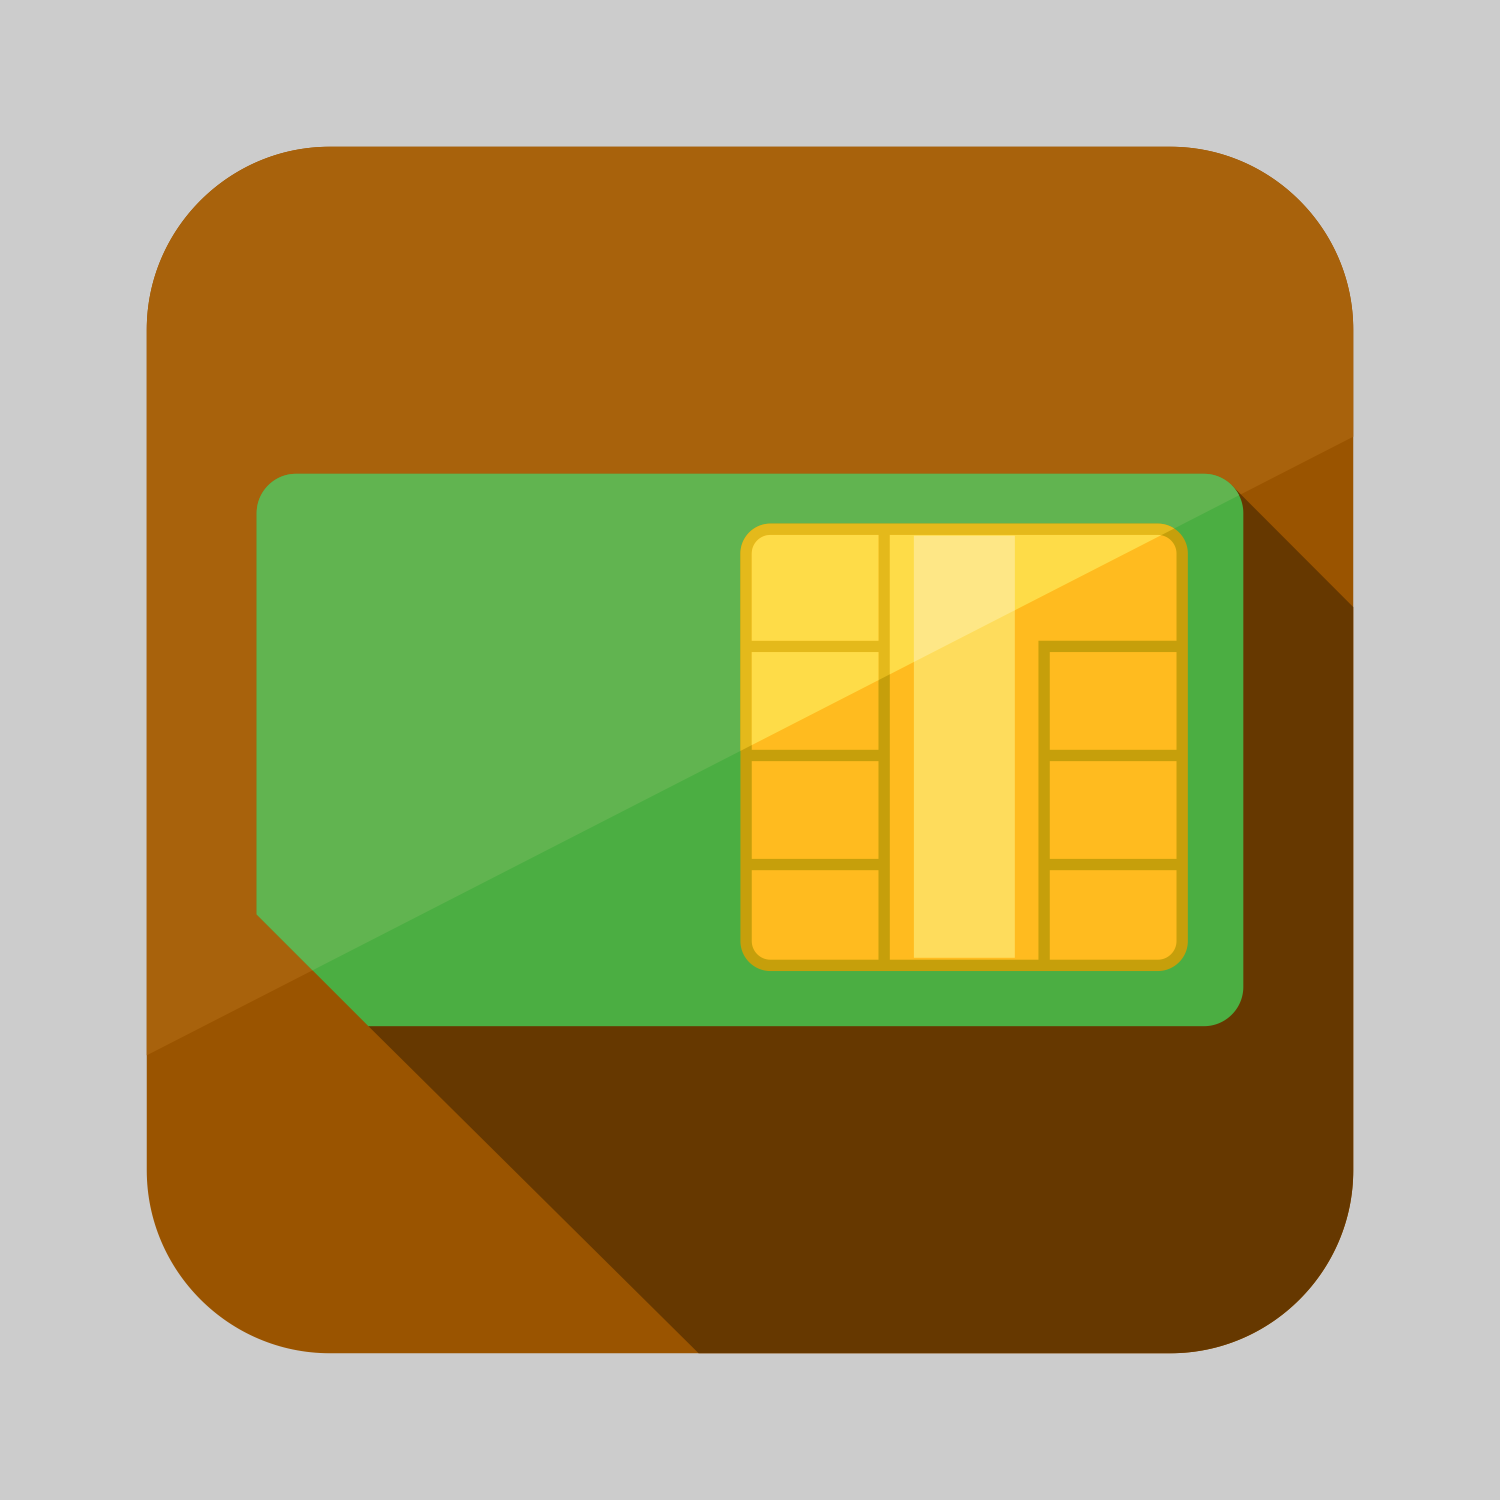 Vector for free use: SIM card icon